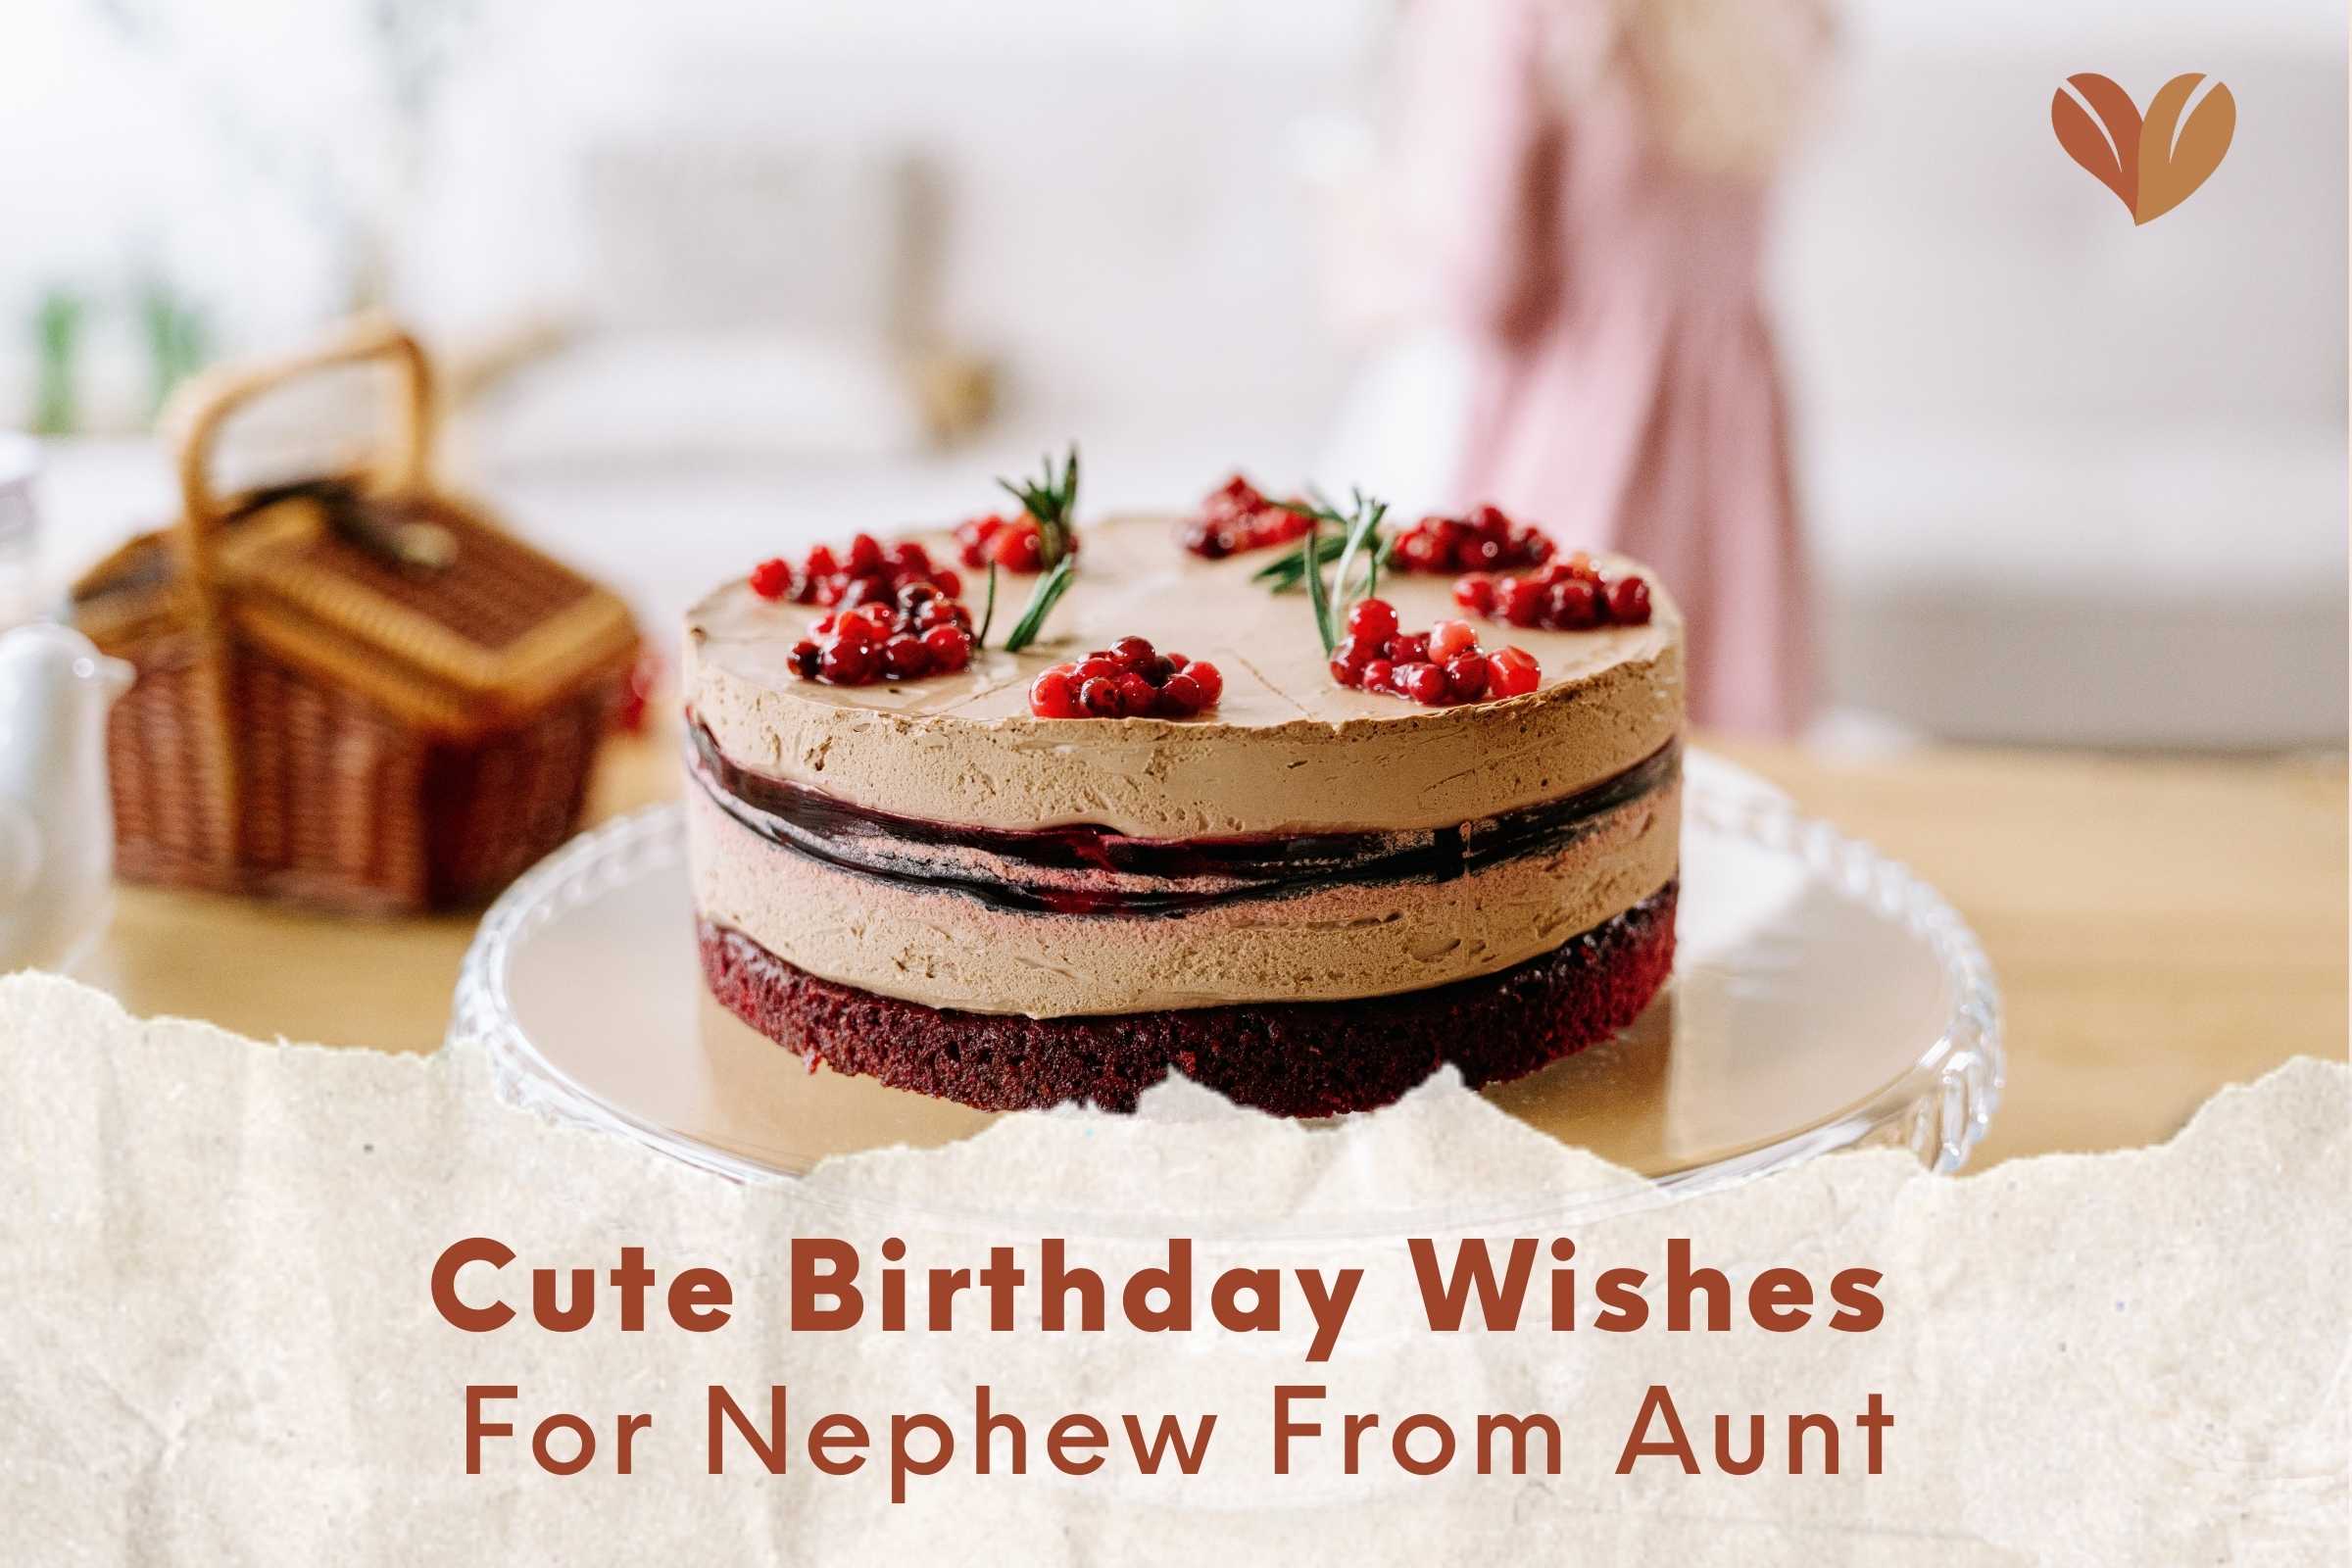 Aunt's love shines through: ultimate birthday wishes for her beloved nephew.